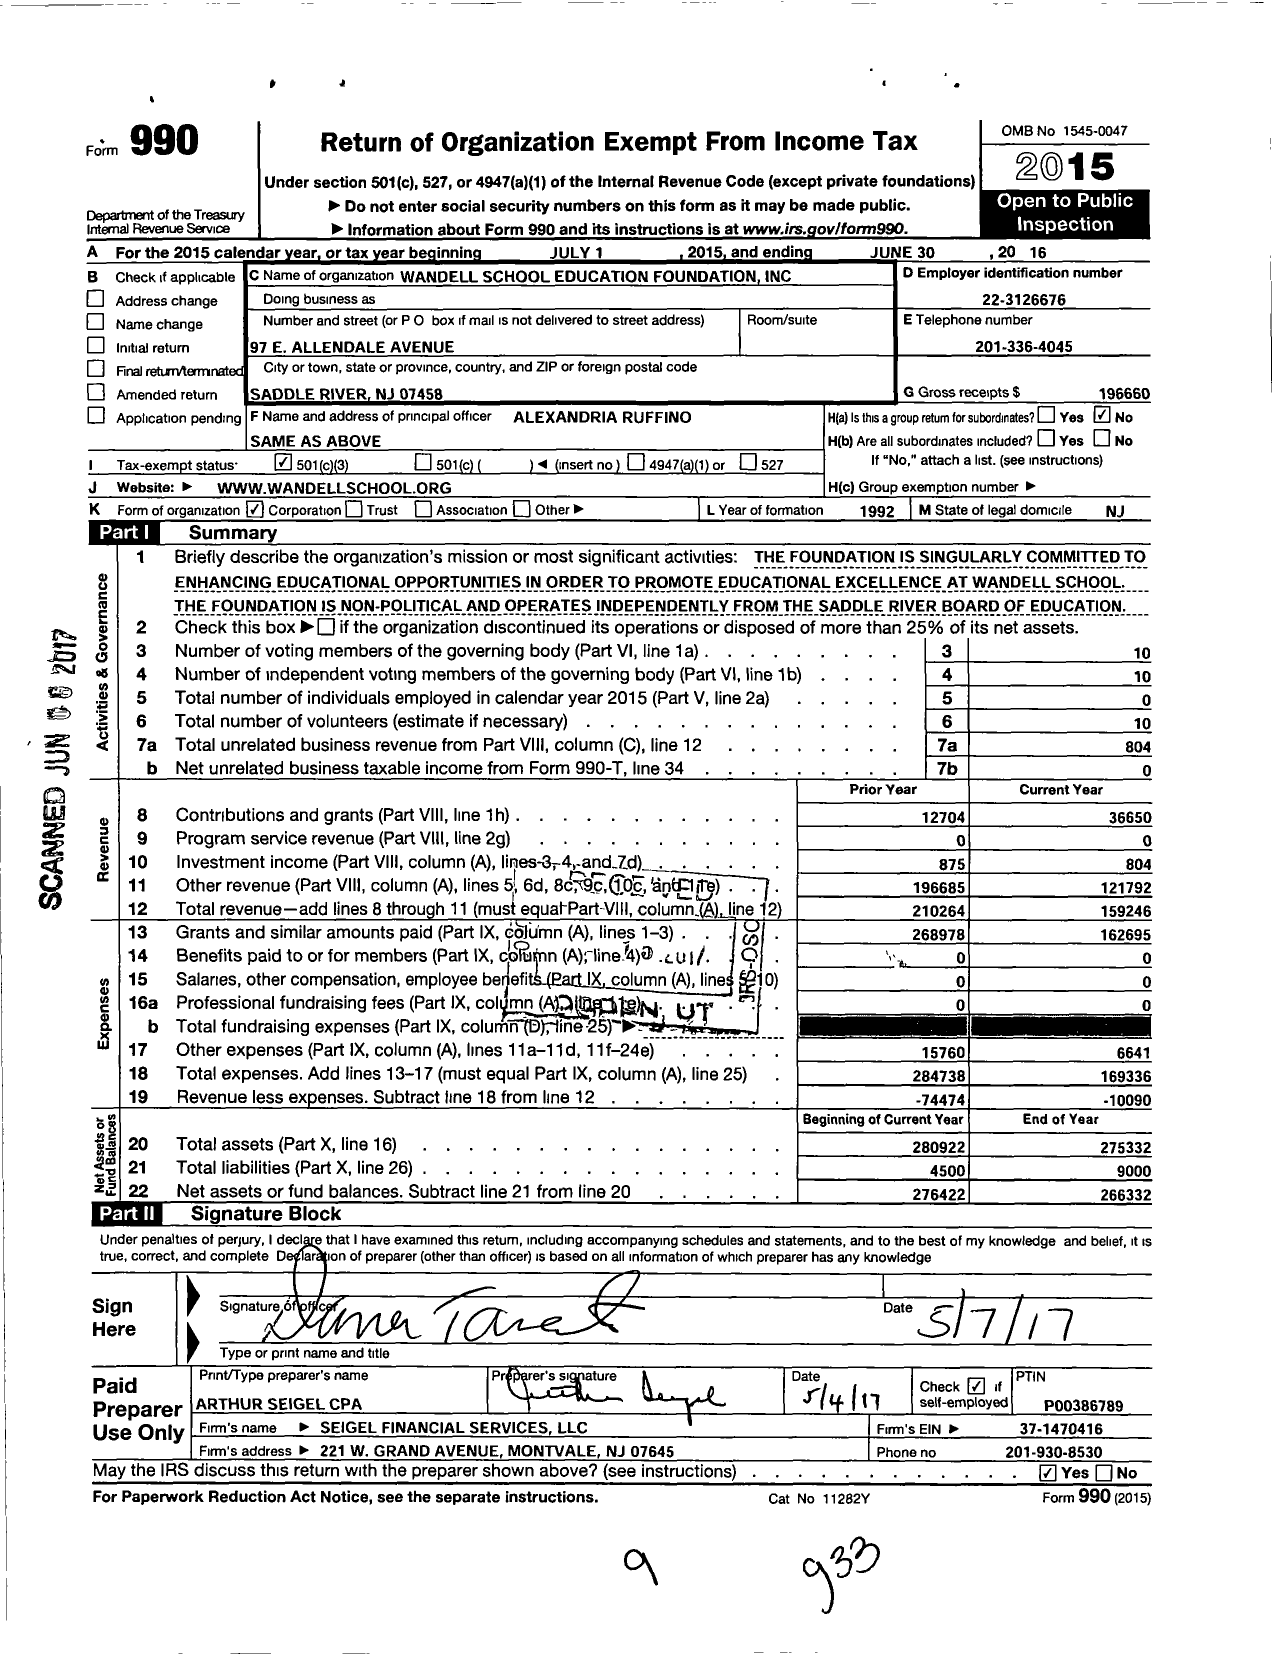 Image of first page of 2015 Form 990 for Wandell School Education Foundation